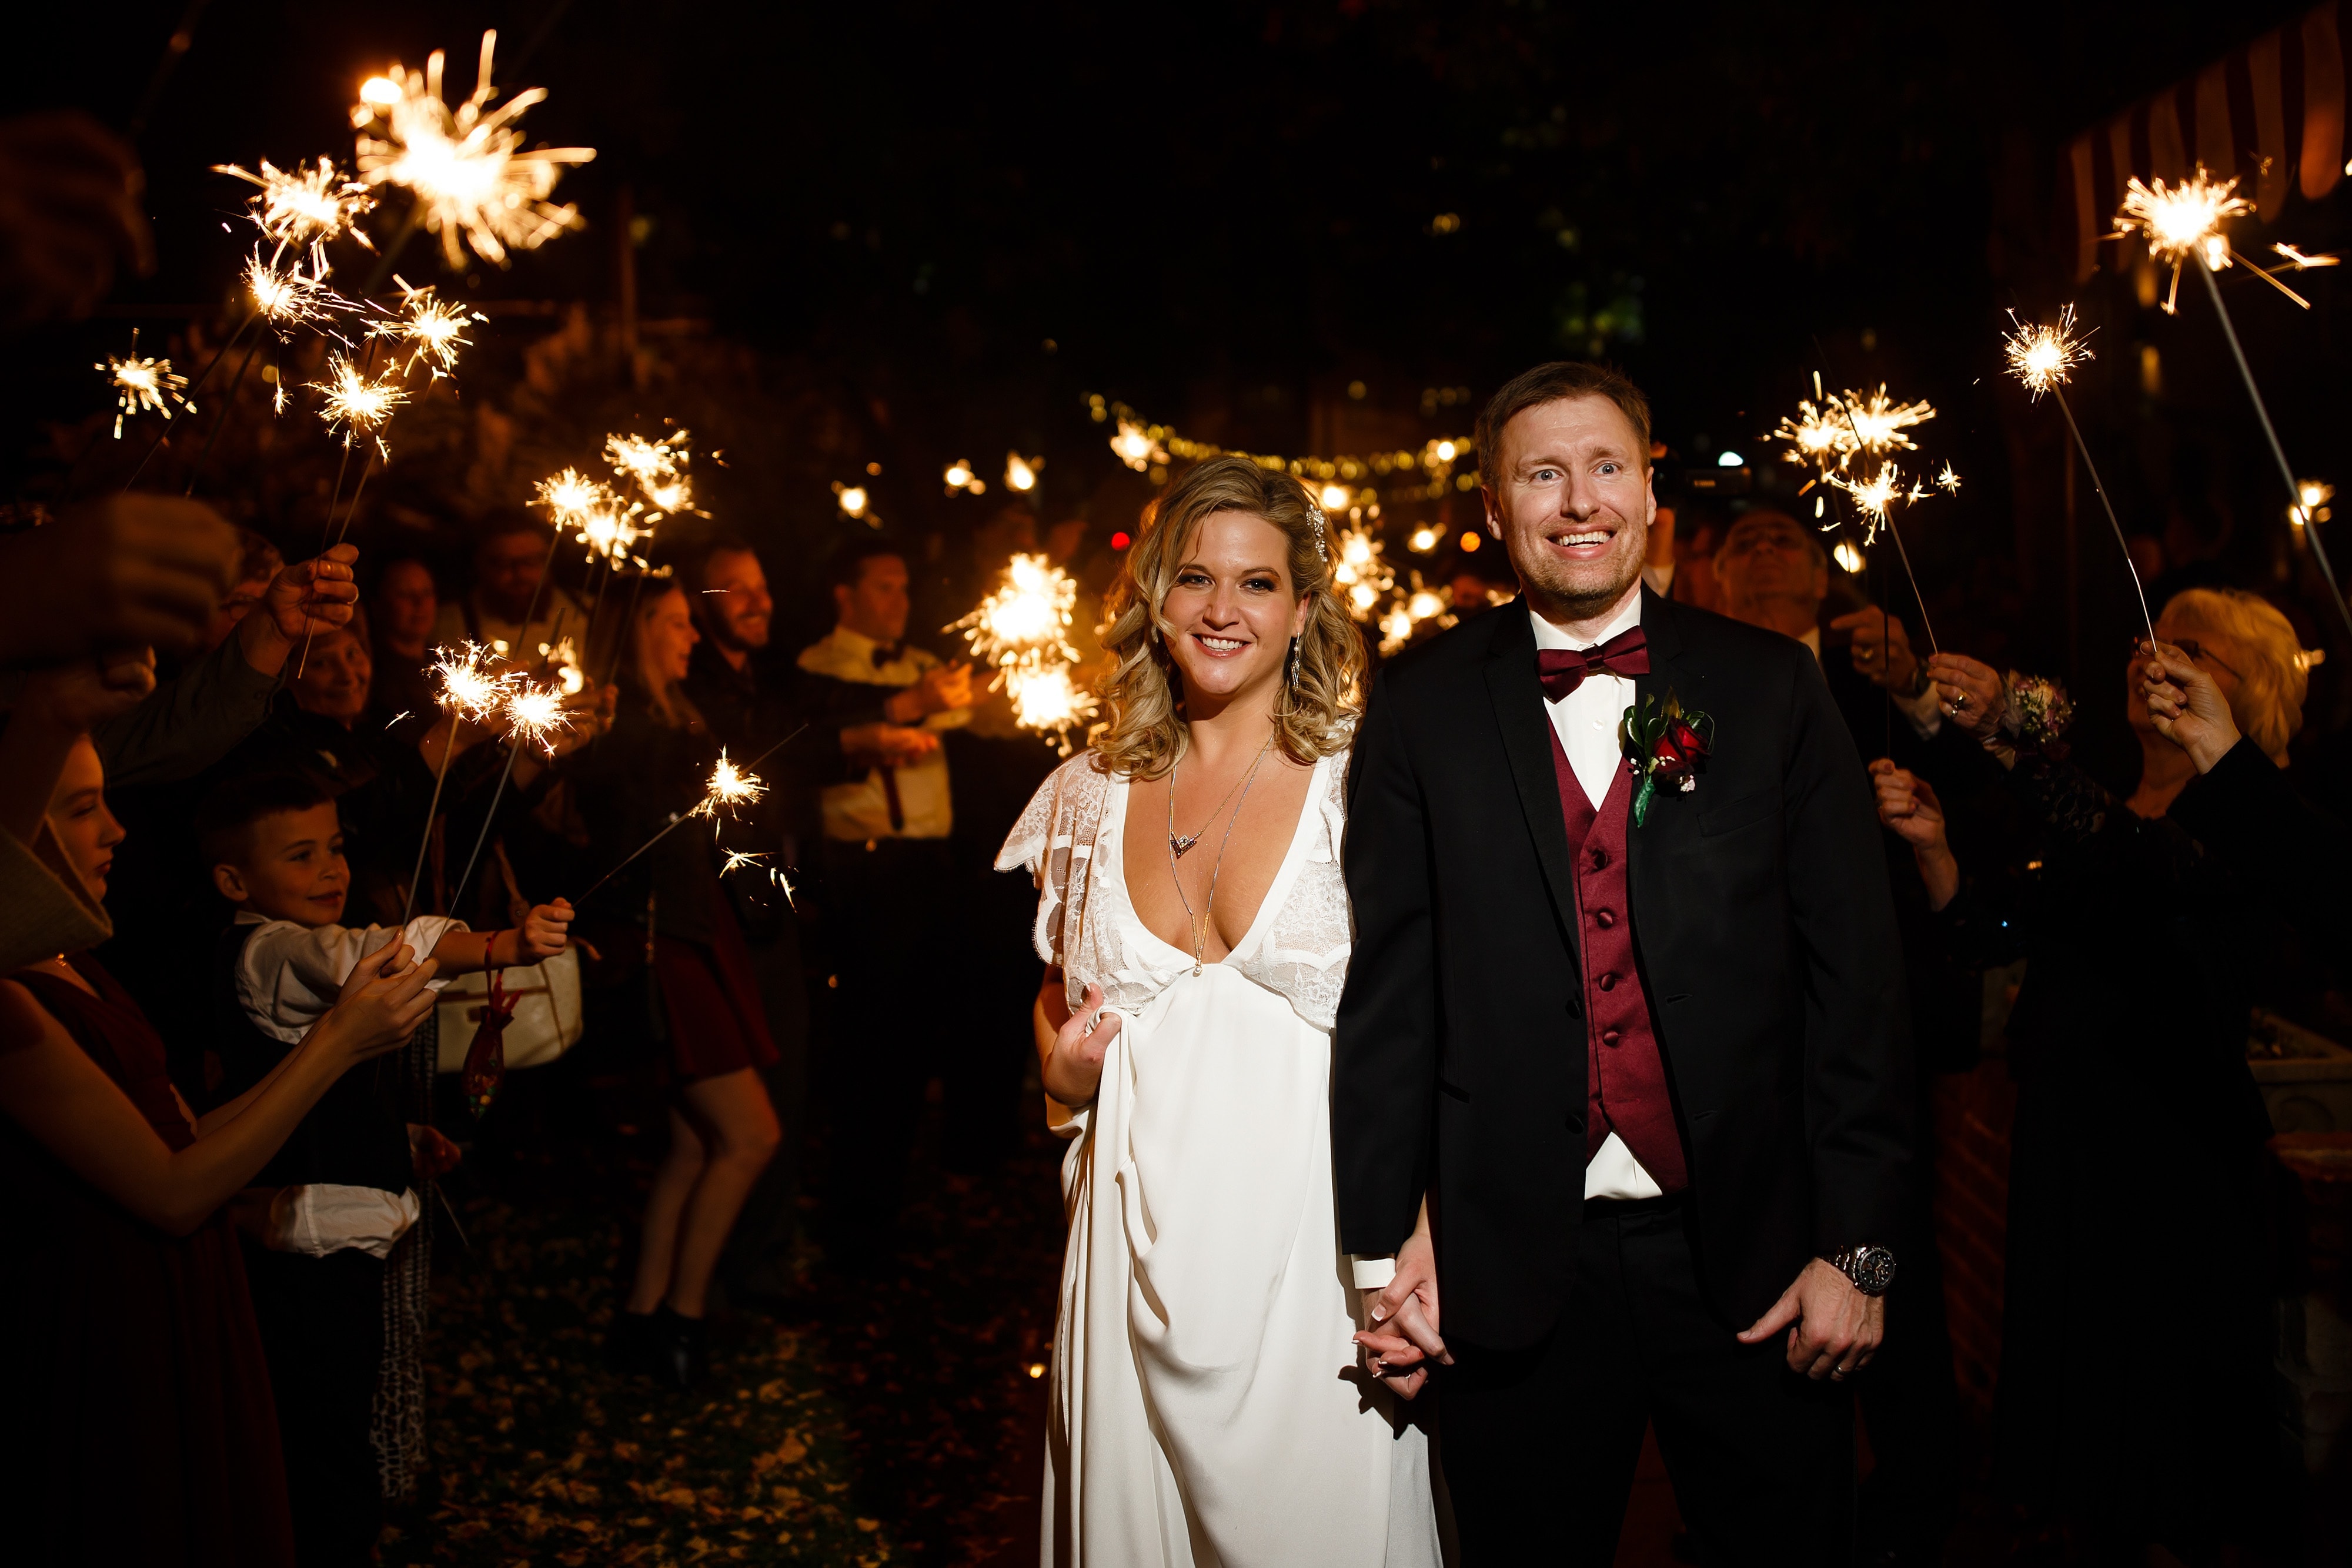 Sarah and Ryan celebrate the end of their fall wedding in Denver at The Lobby restaurant with a sparkler exit